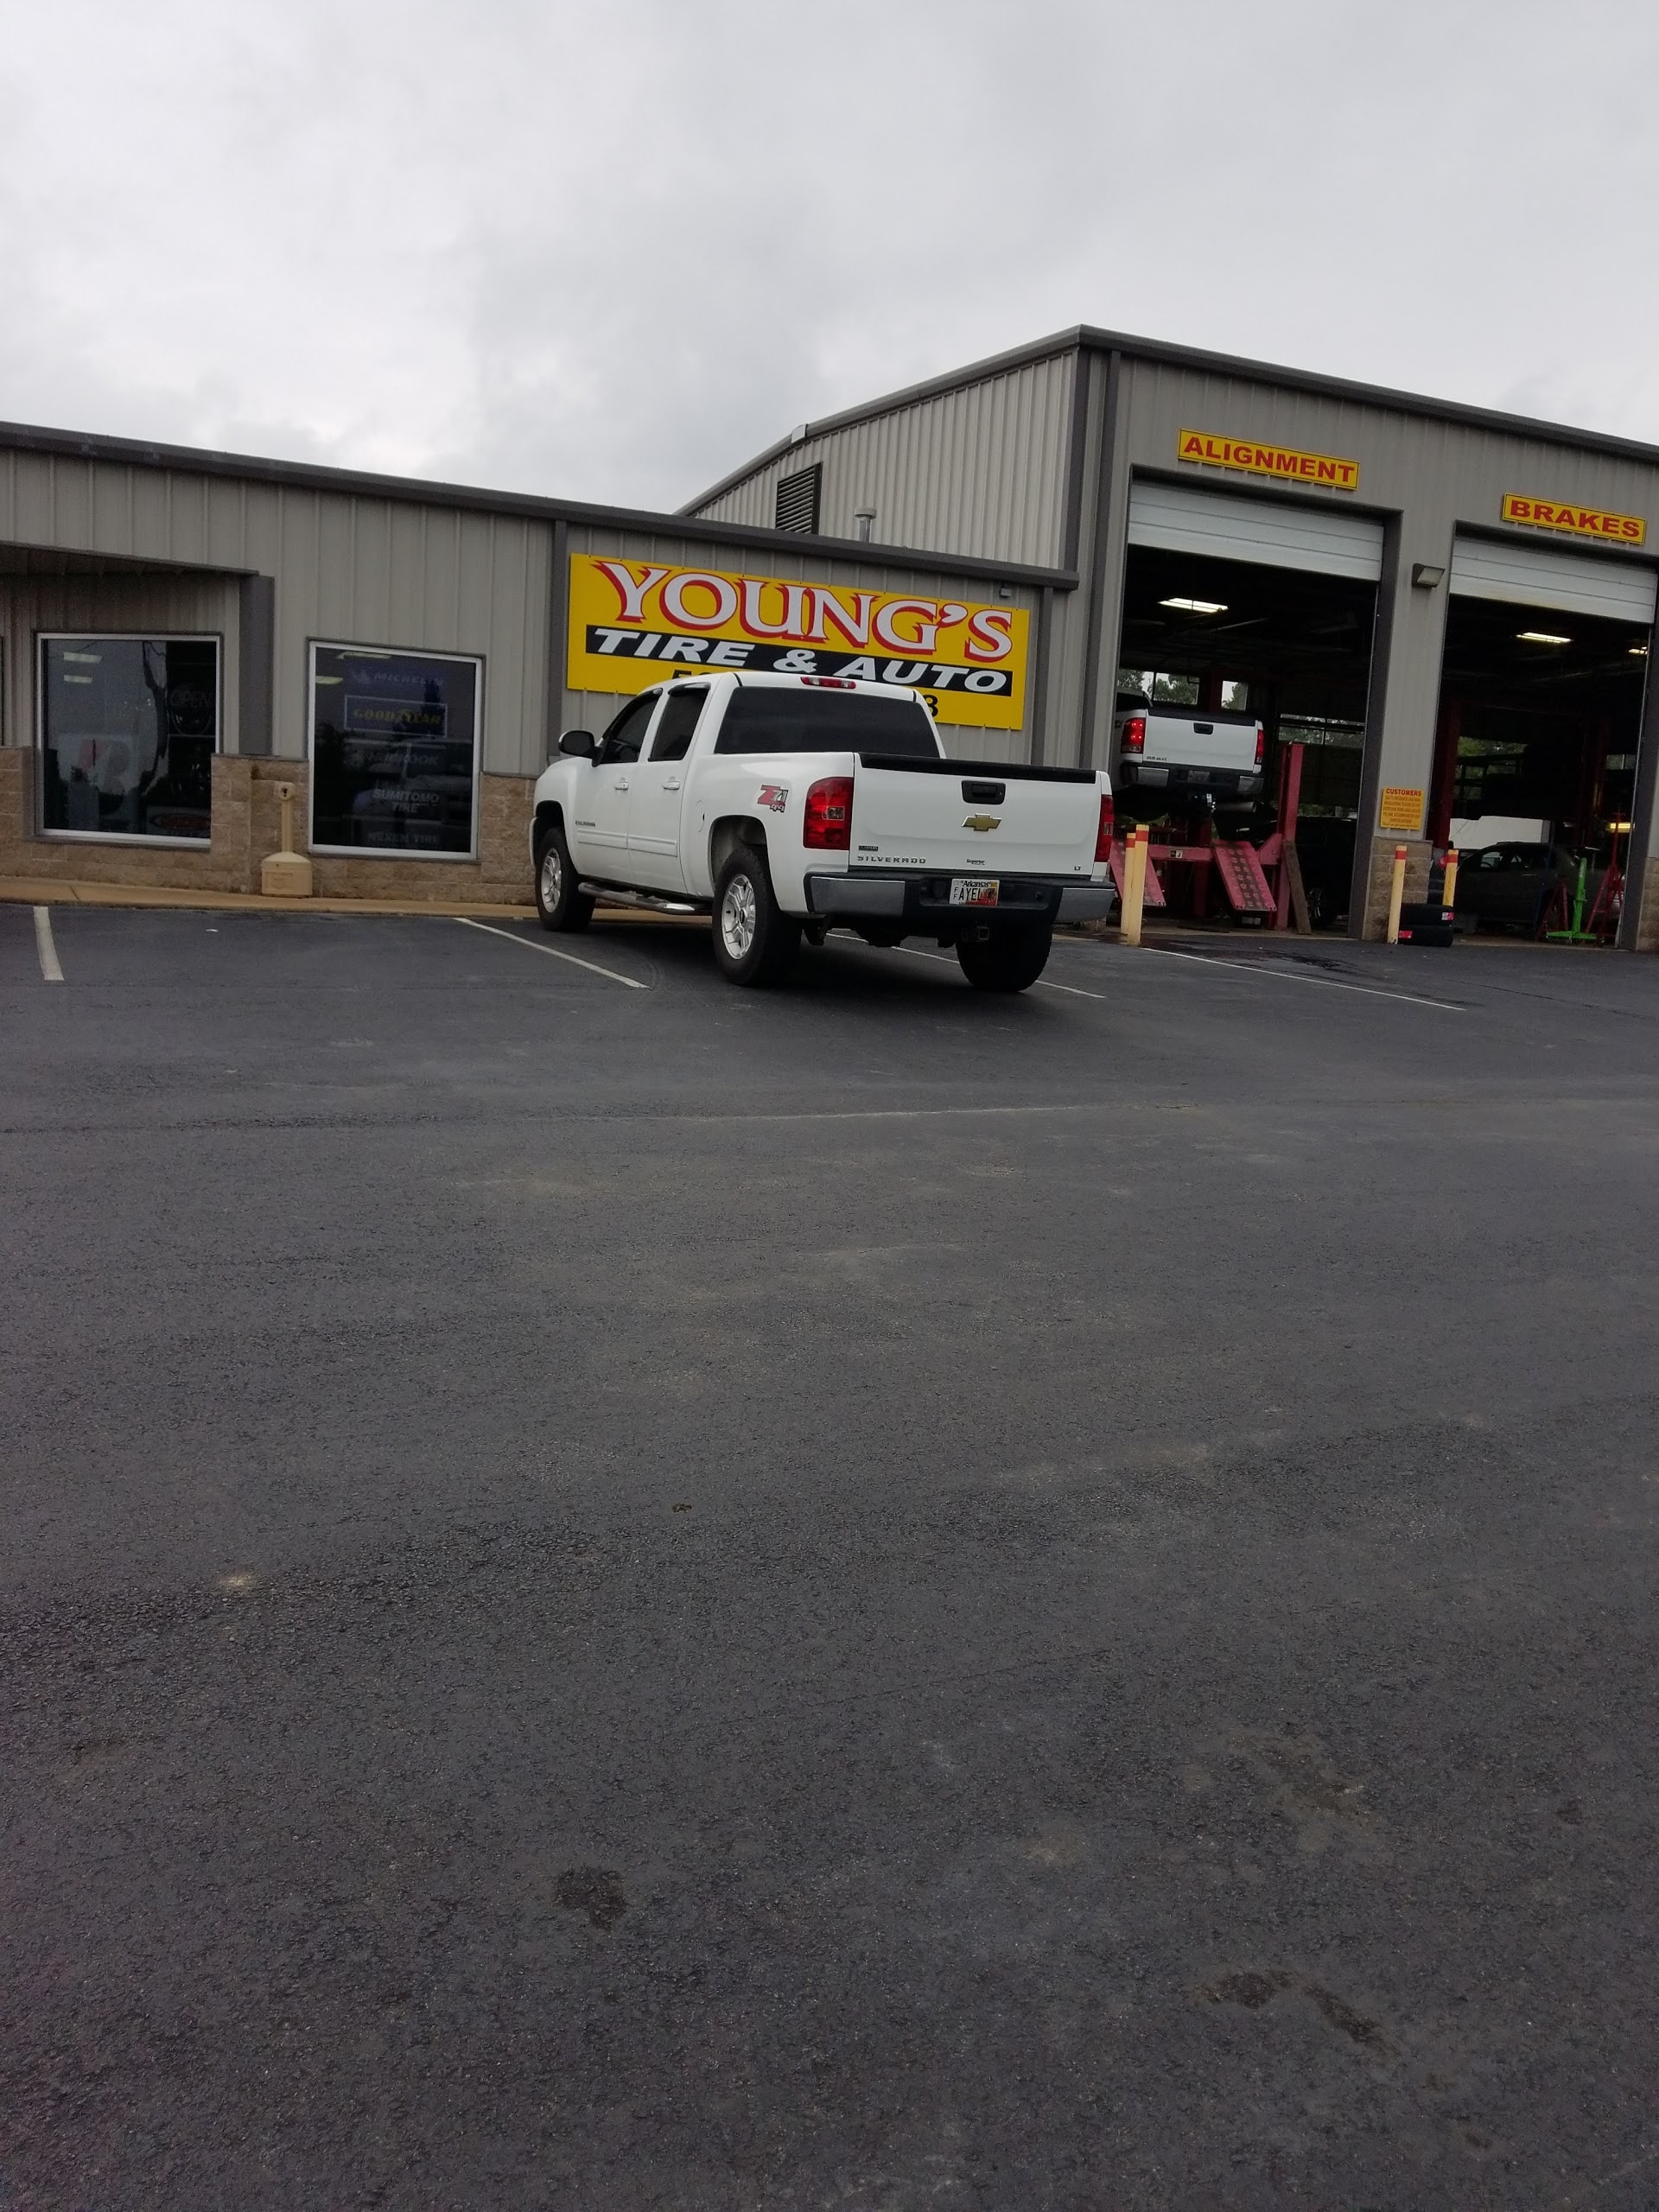 Young's Tire & Auto - Cabot, US, vehicle tires